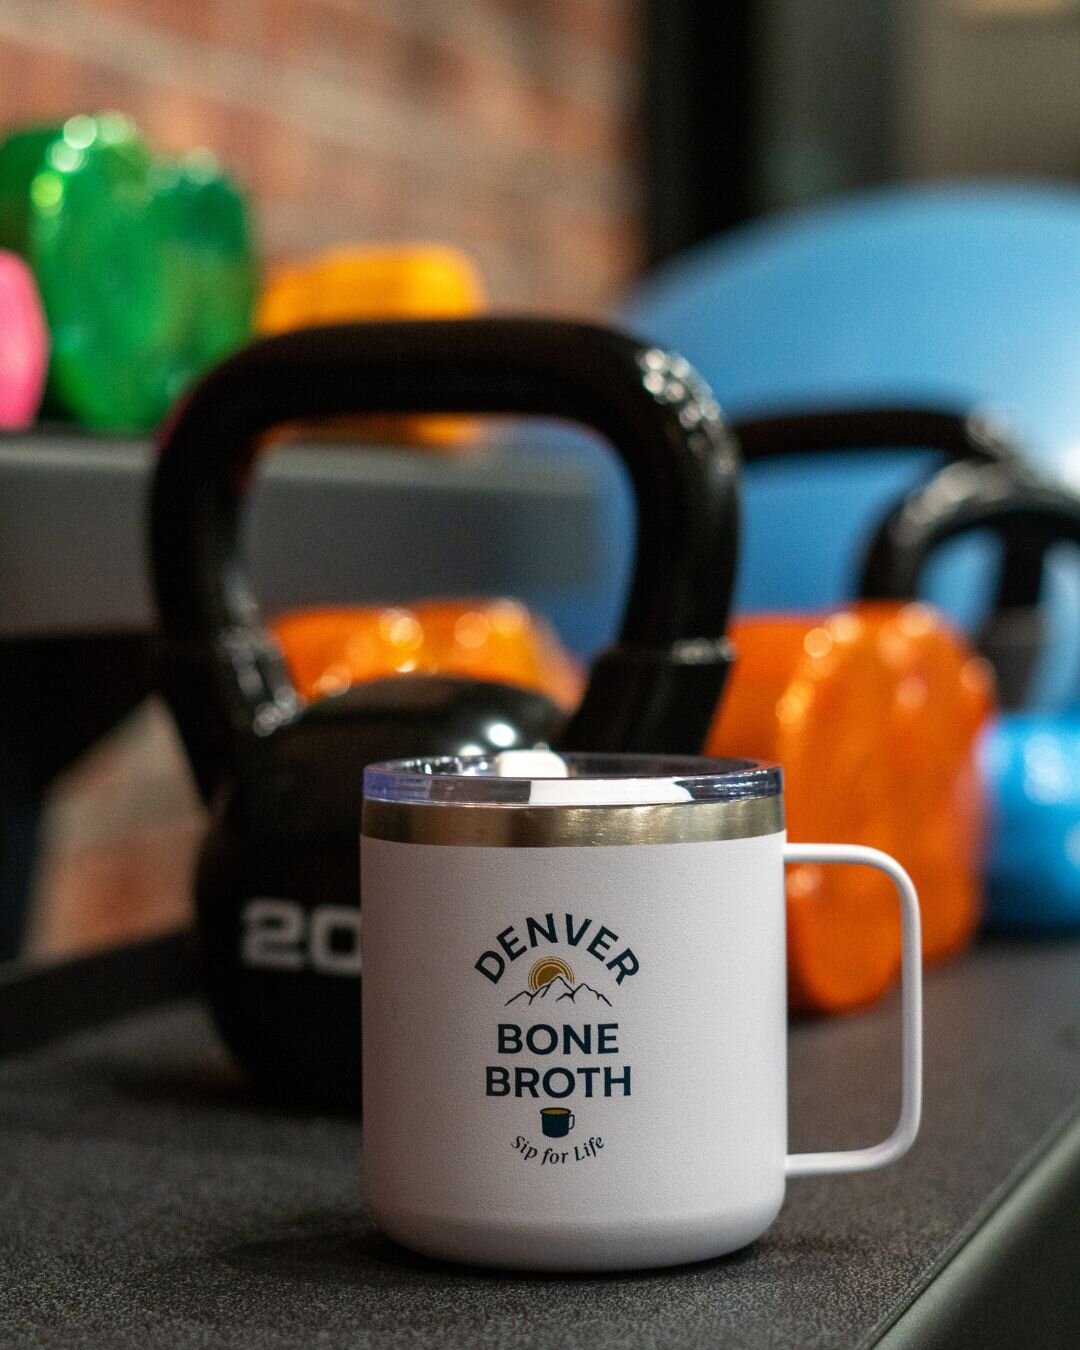 We have the secret to crushing your health goals this year! 🏋️

*Hint* It's bone broth.

Drinking bone broth before - or after - your workout will help you add essential nutrients such as protein, amino acids, electrolytes and collagen to help boost